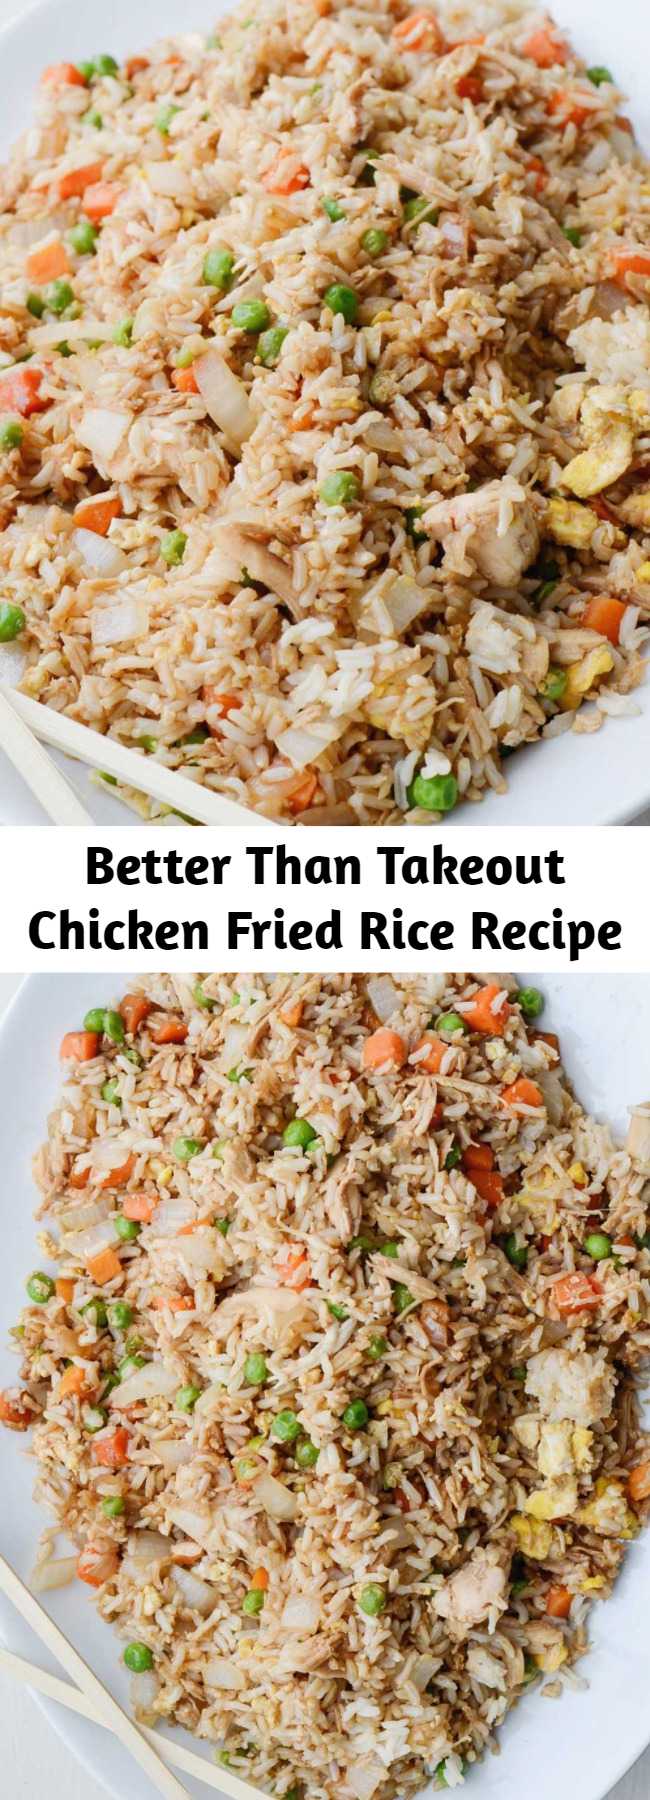 Better Than Takeout Chicken Fried Rice Recipe - Here is my version of this classic dish – not that I have any claim to being an authority on what is “authentic” Chinese food. I am an authority, however, on what is super incredibly yummy.  This rice gets my stamp of approval, with honors. It is better than takeout, and you can enjoy skipping all the mysterious, unhealthy parts of fast food.